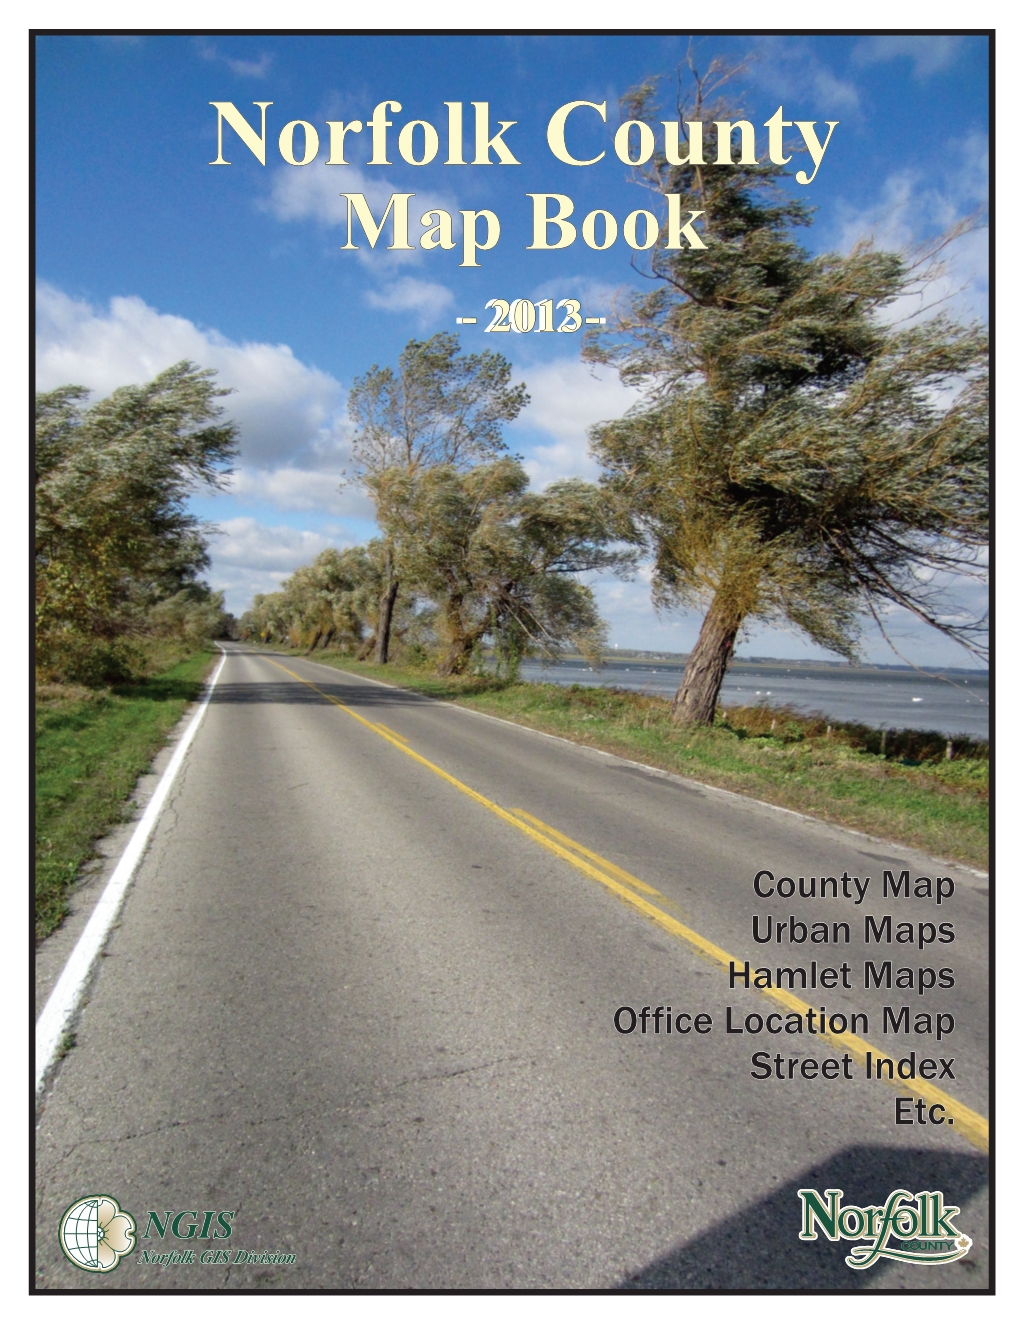 Norfolk County Map Book